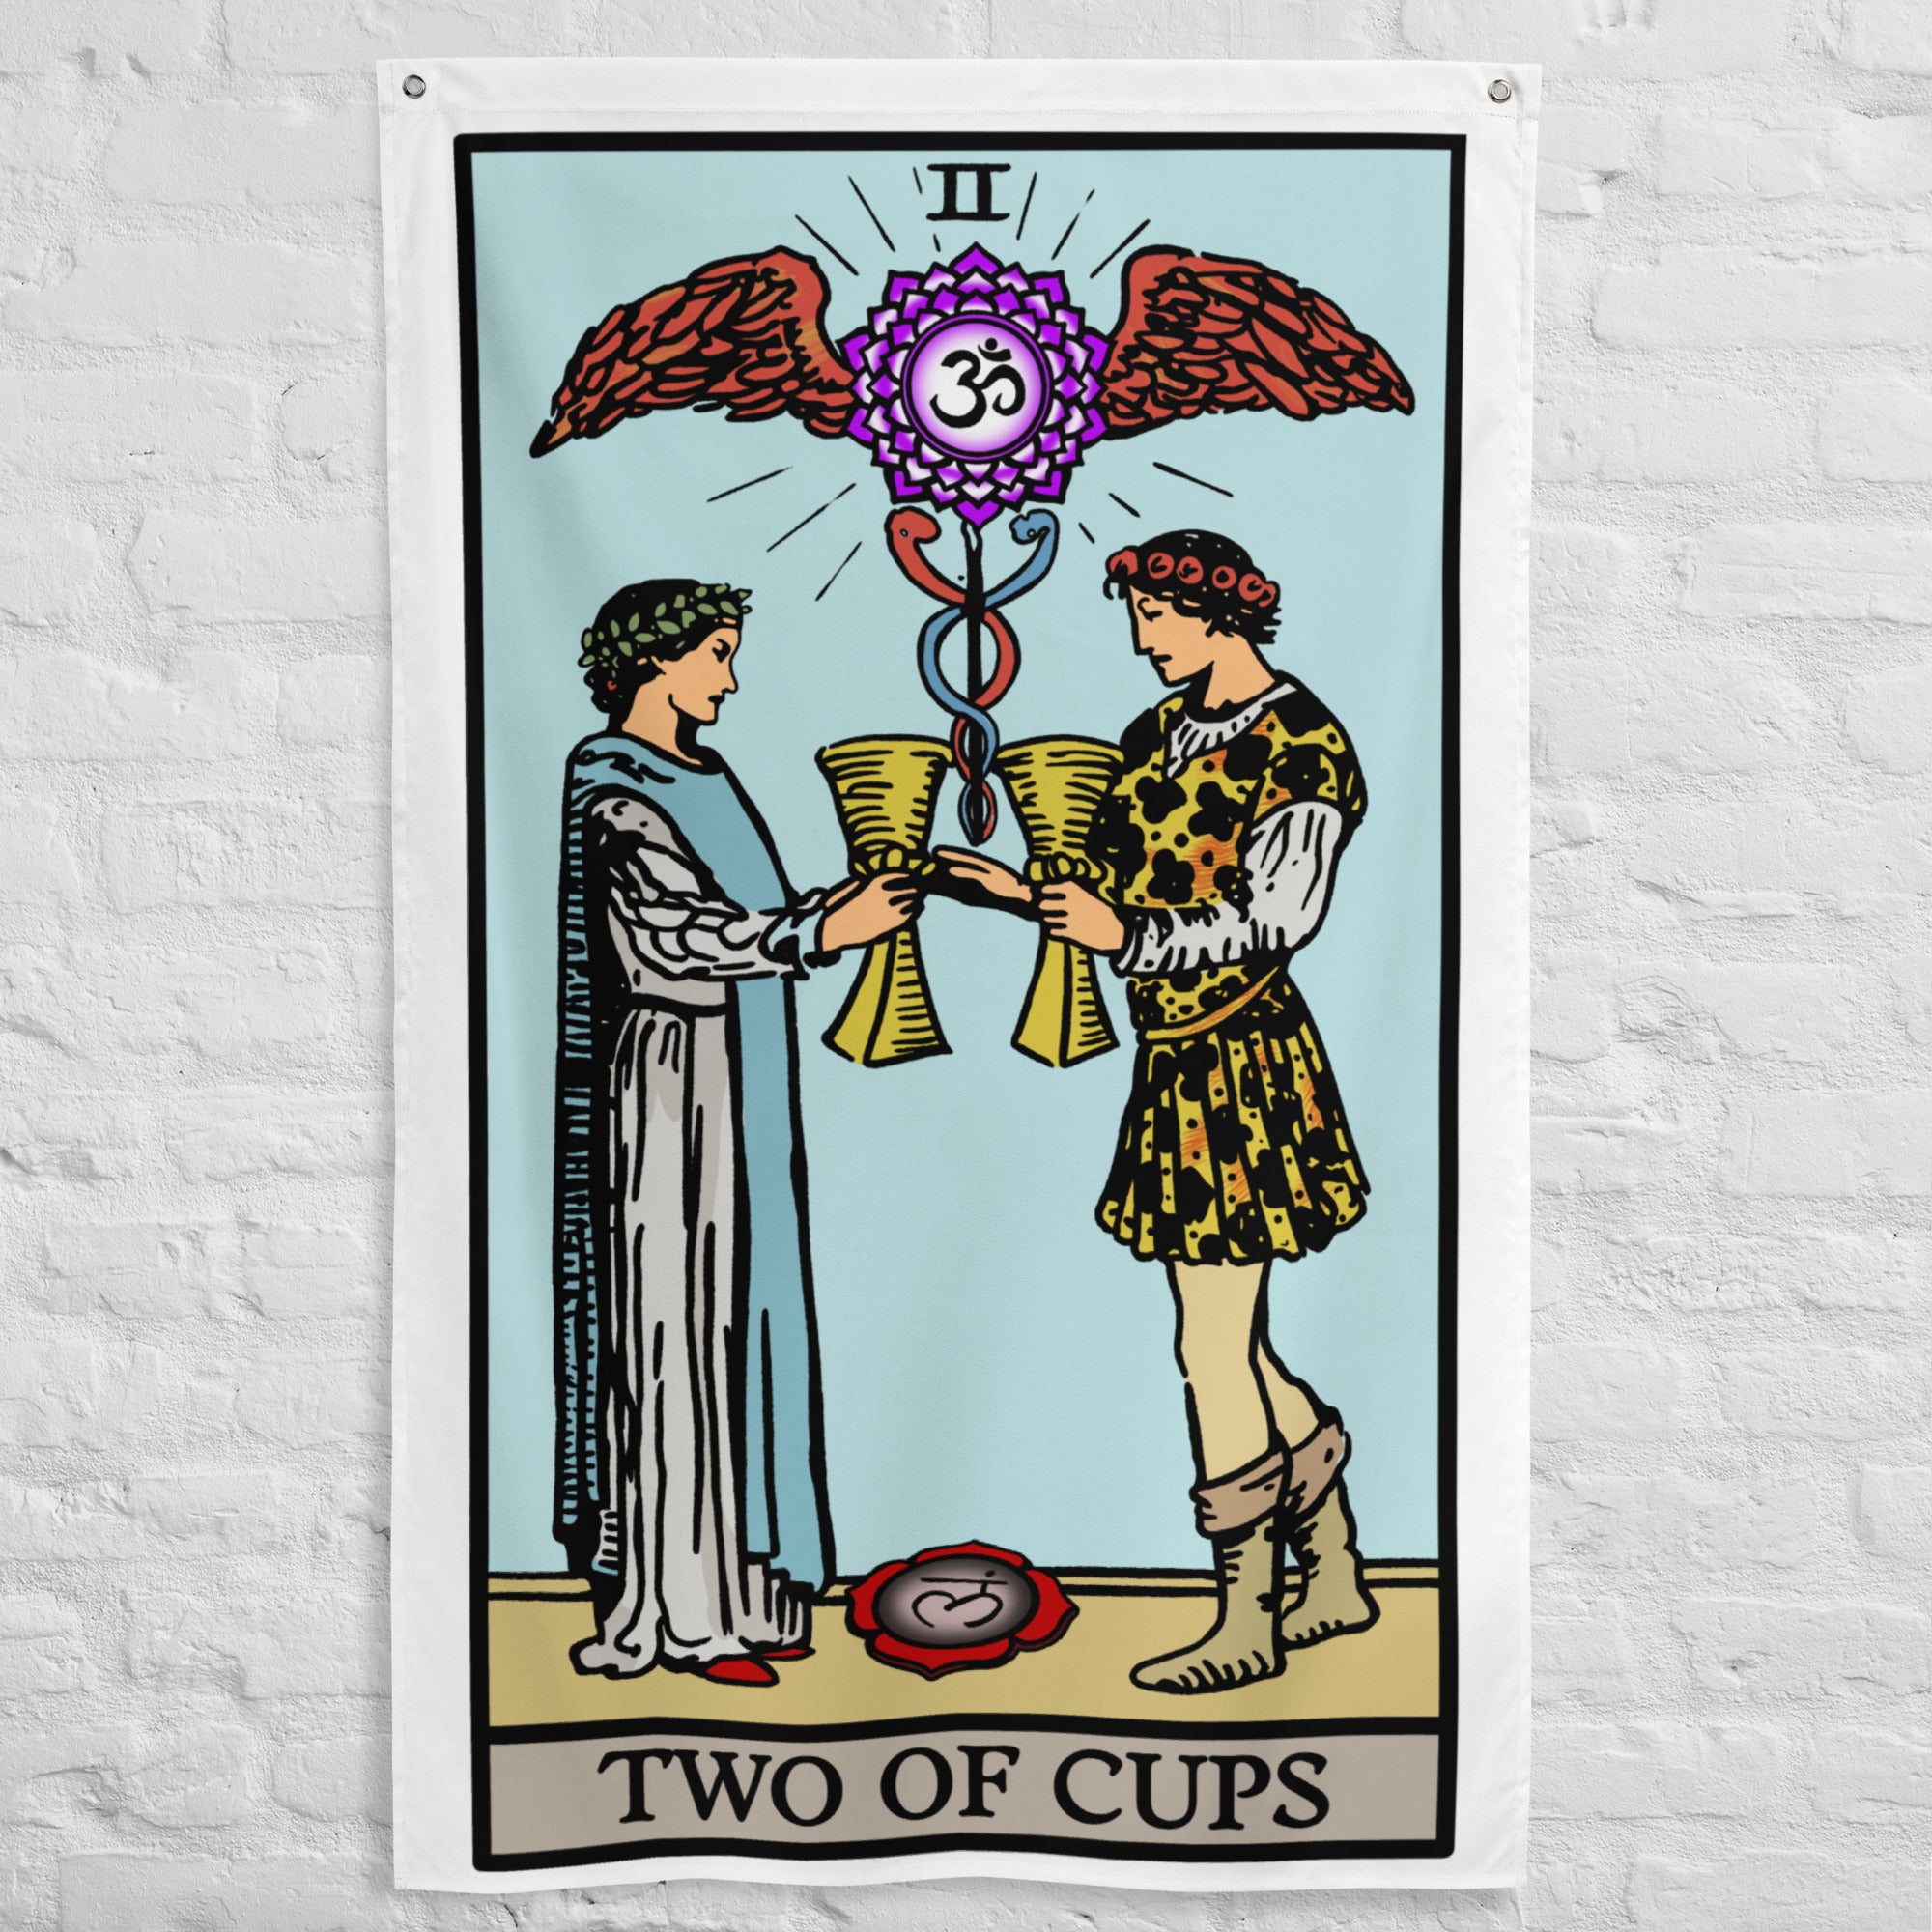 Two of Cups Tarot Card Meaning